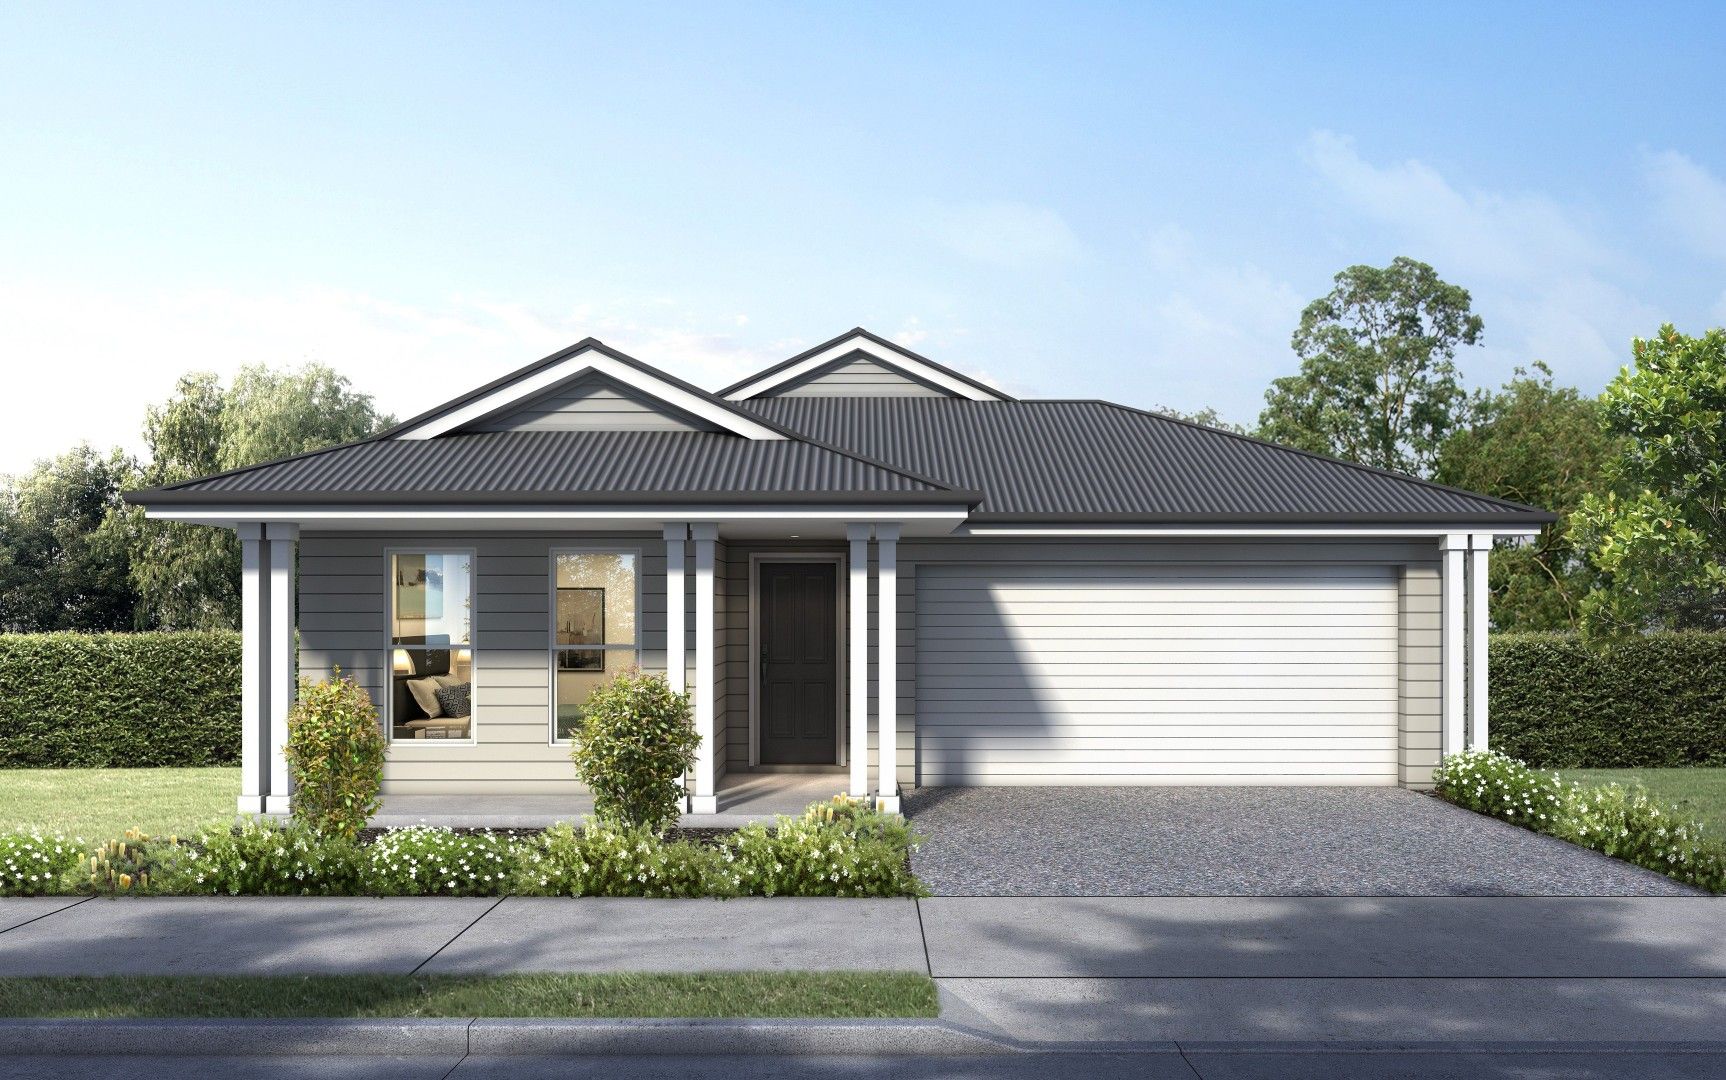 4 bedrooms New House & Land in Lot 48 Road 01 GLEDSWOOD HILLS NSW, 2557